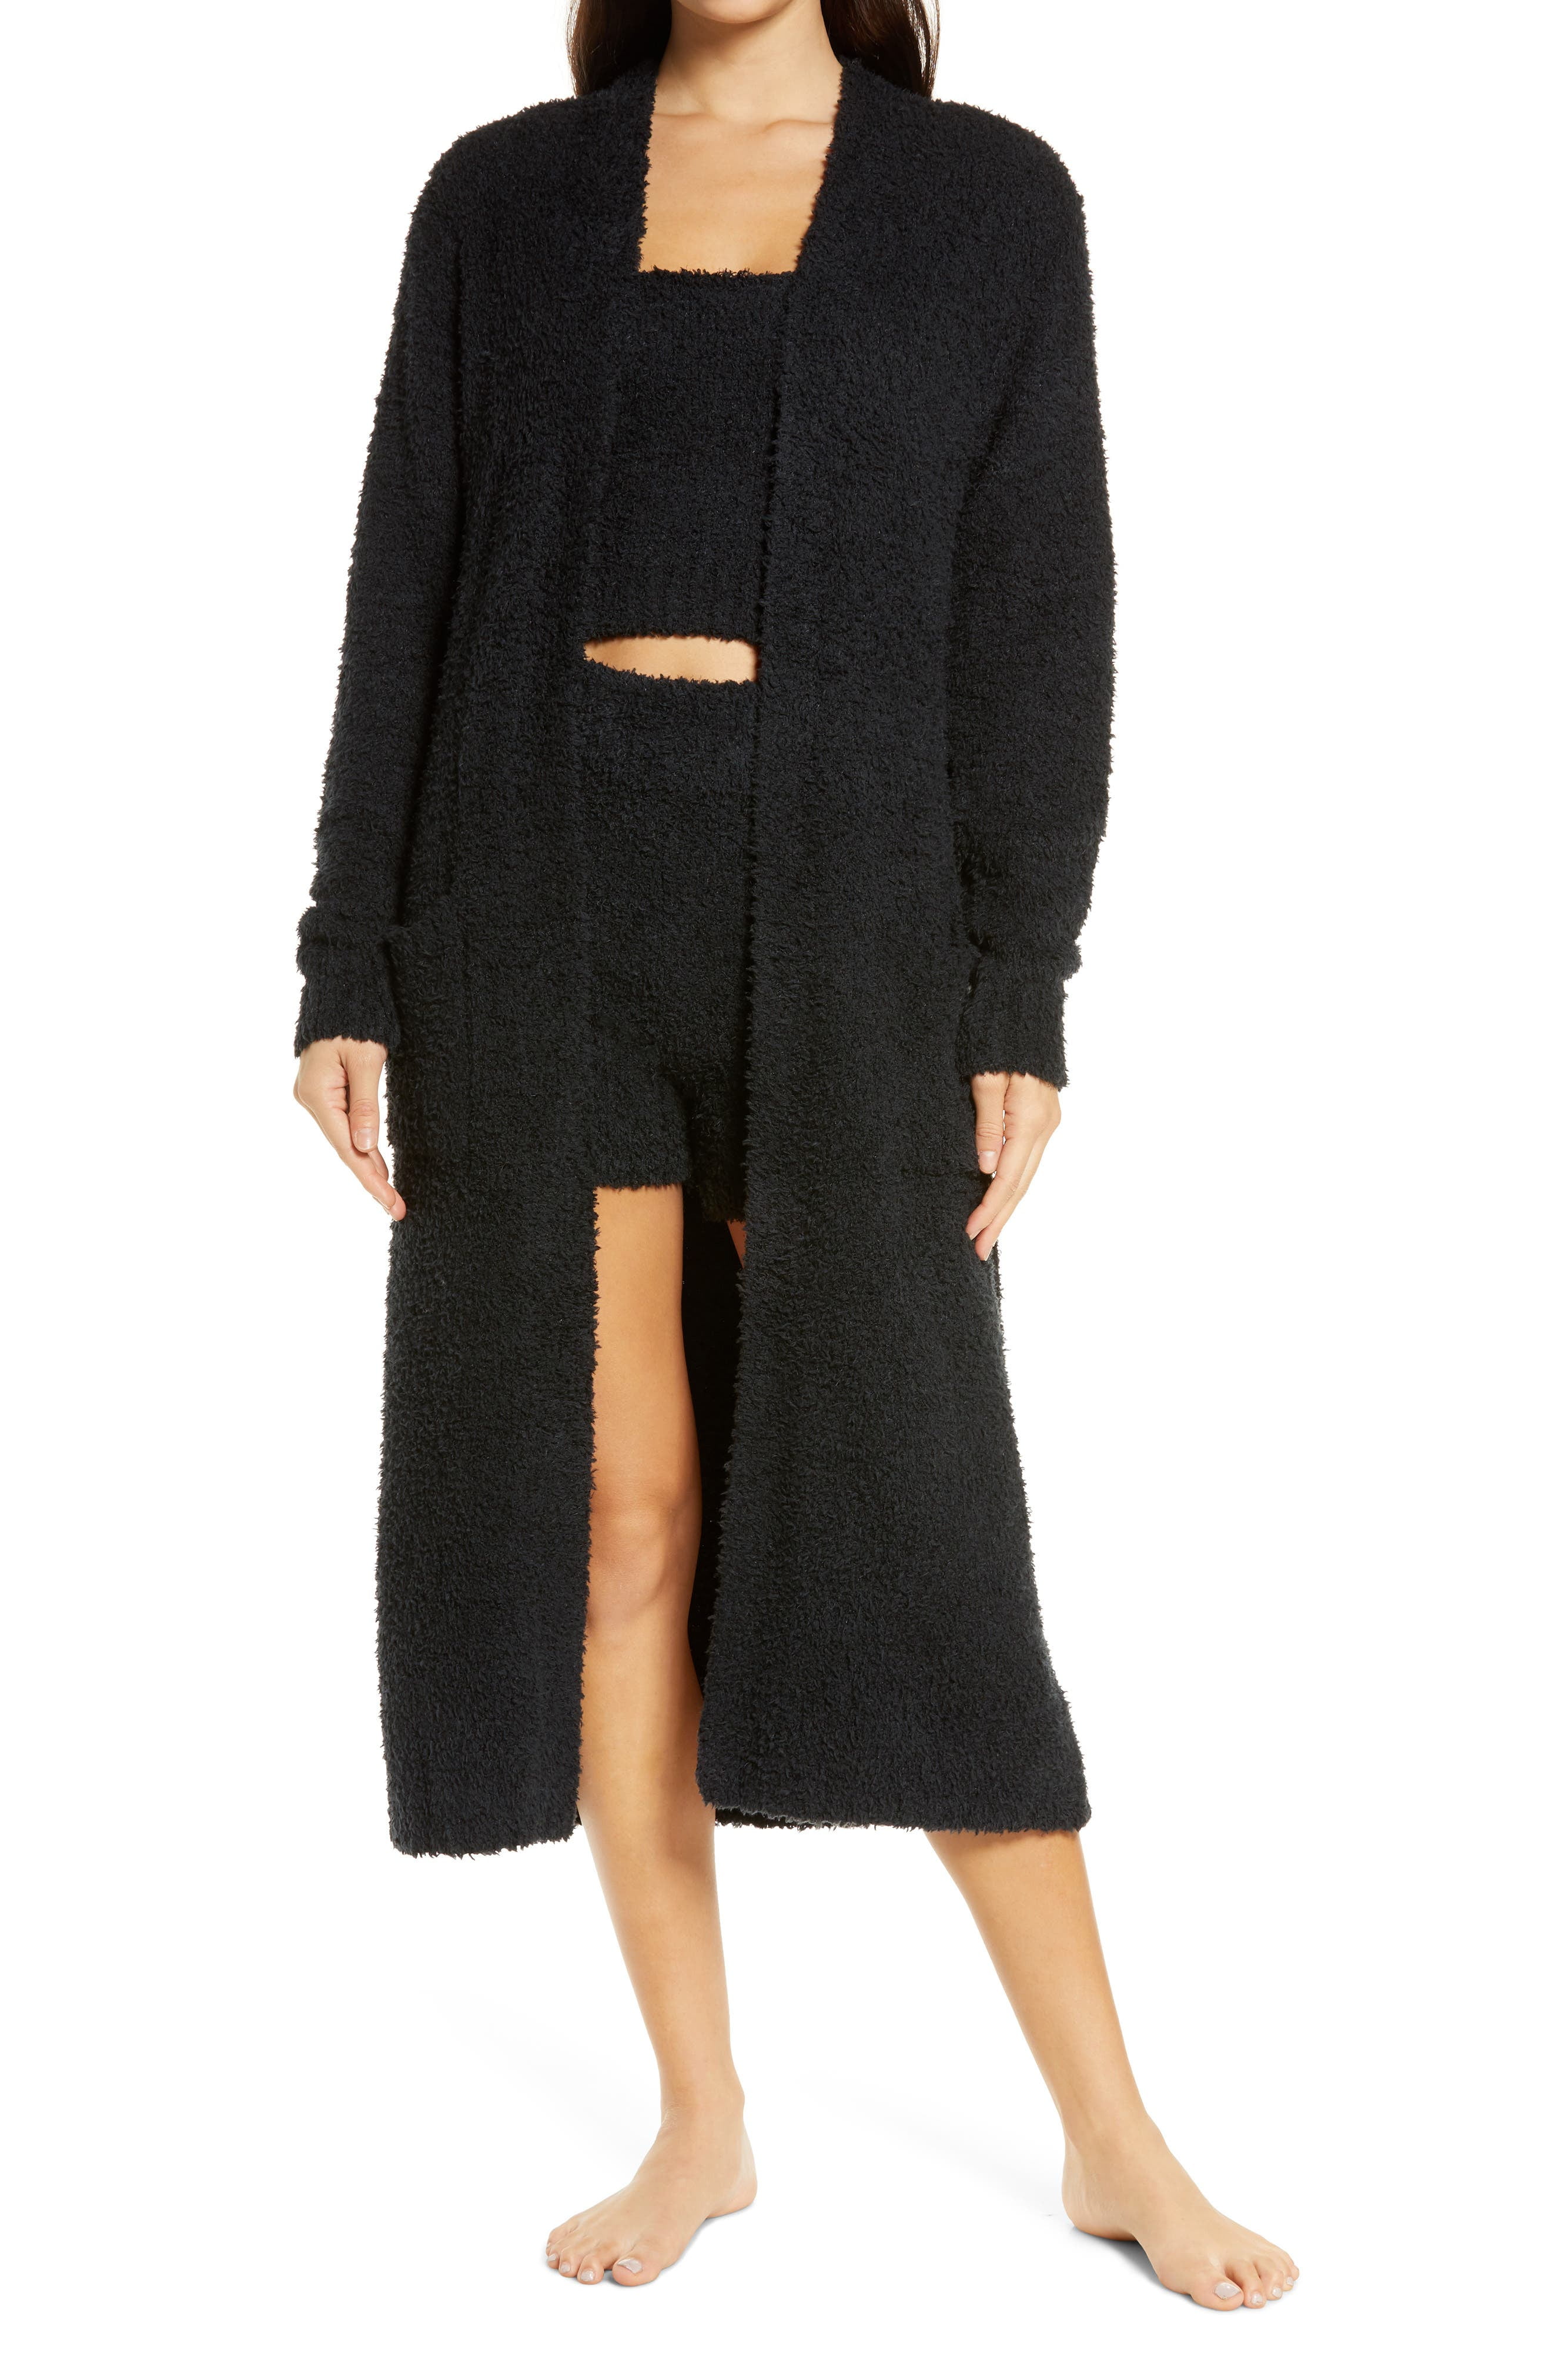 SKIMS Cozy Knit Boucle Robe in Onyx at Nordstrom, Size 2X-3X 